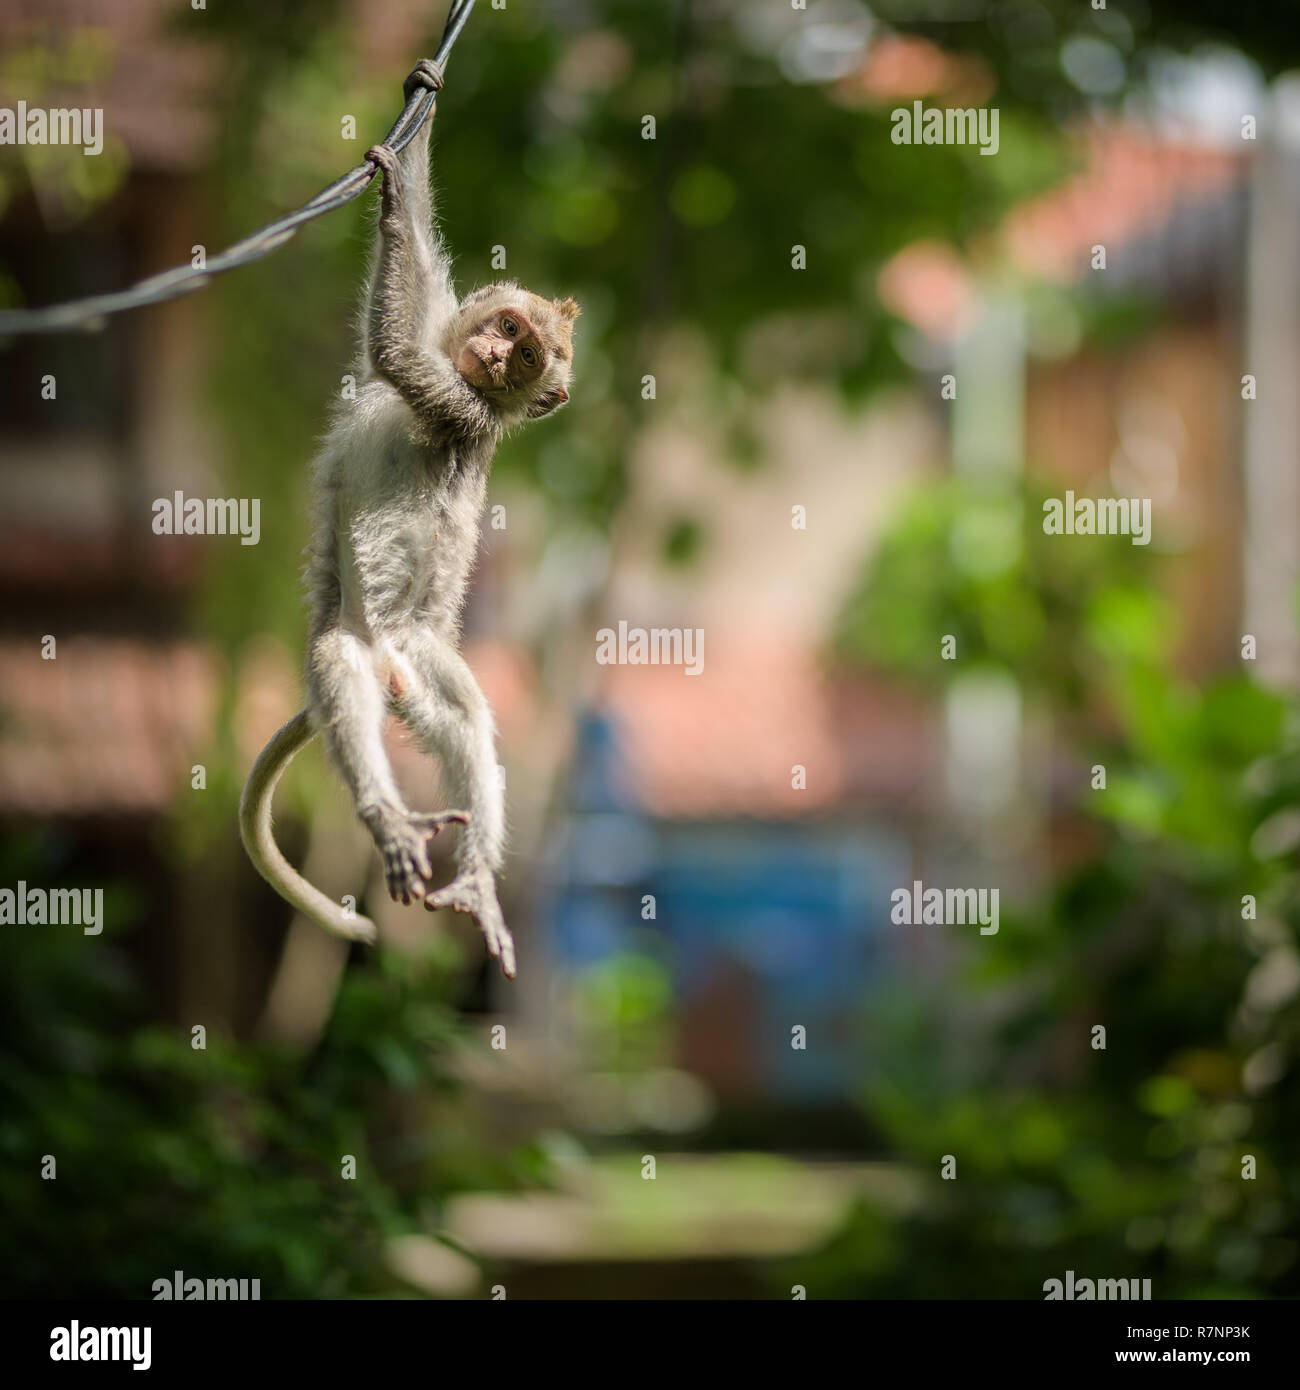 A young long-tailed macaque monkey is hanging from a wire in the balinese Hindu temple of the sacred Ubud Forest in Bali, Indonesia. Stock Photo